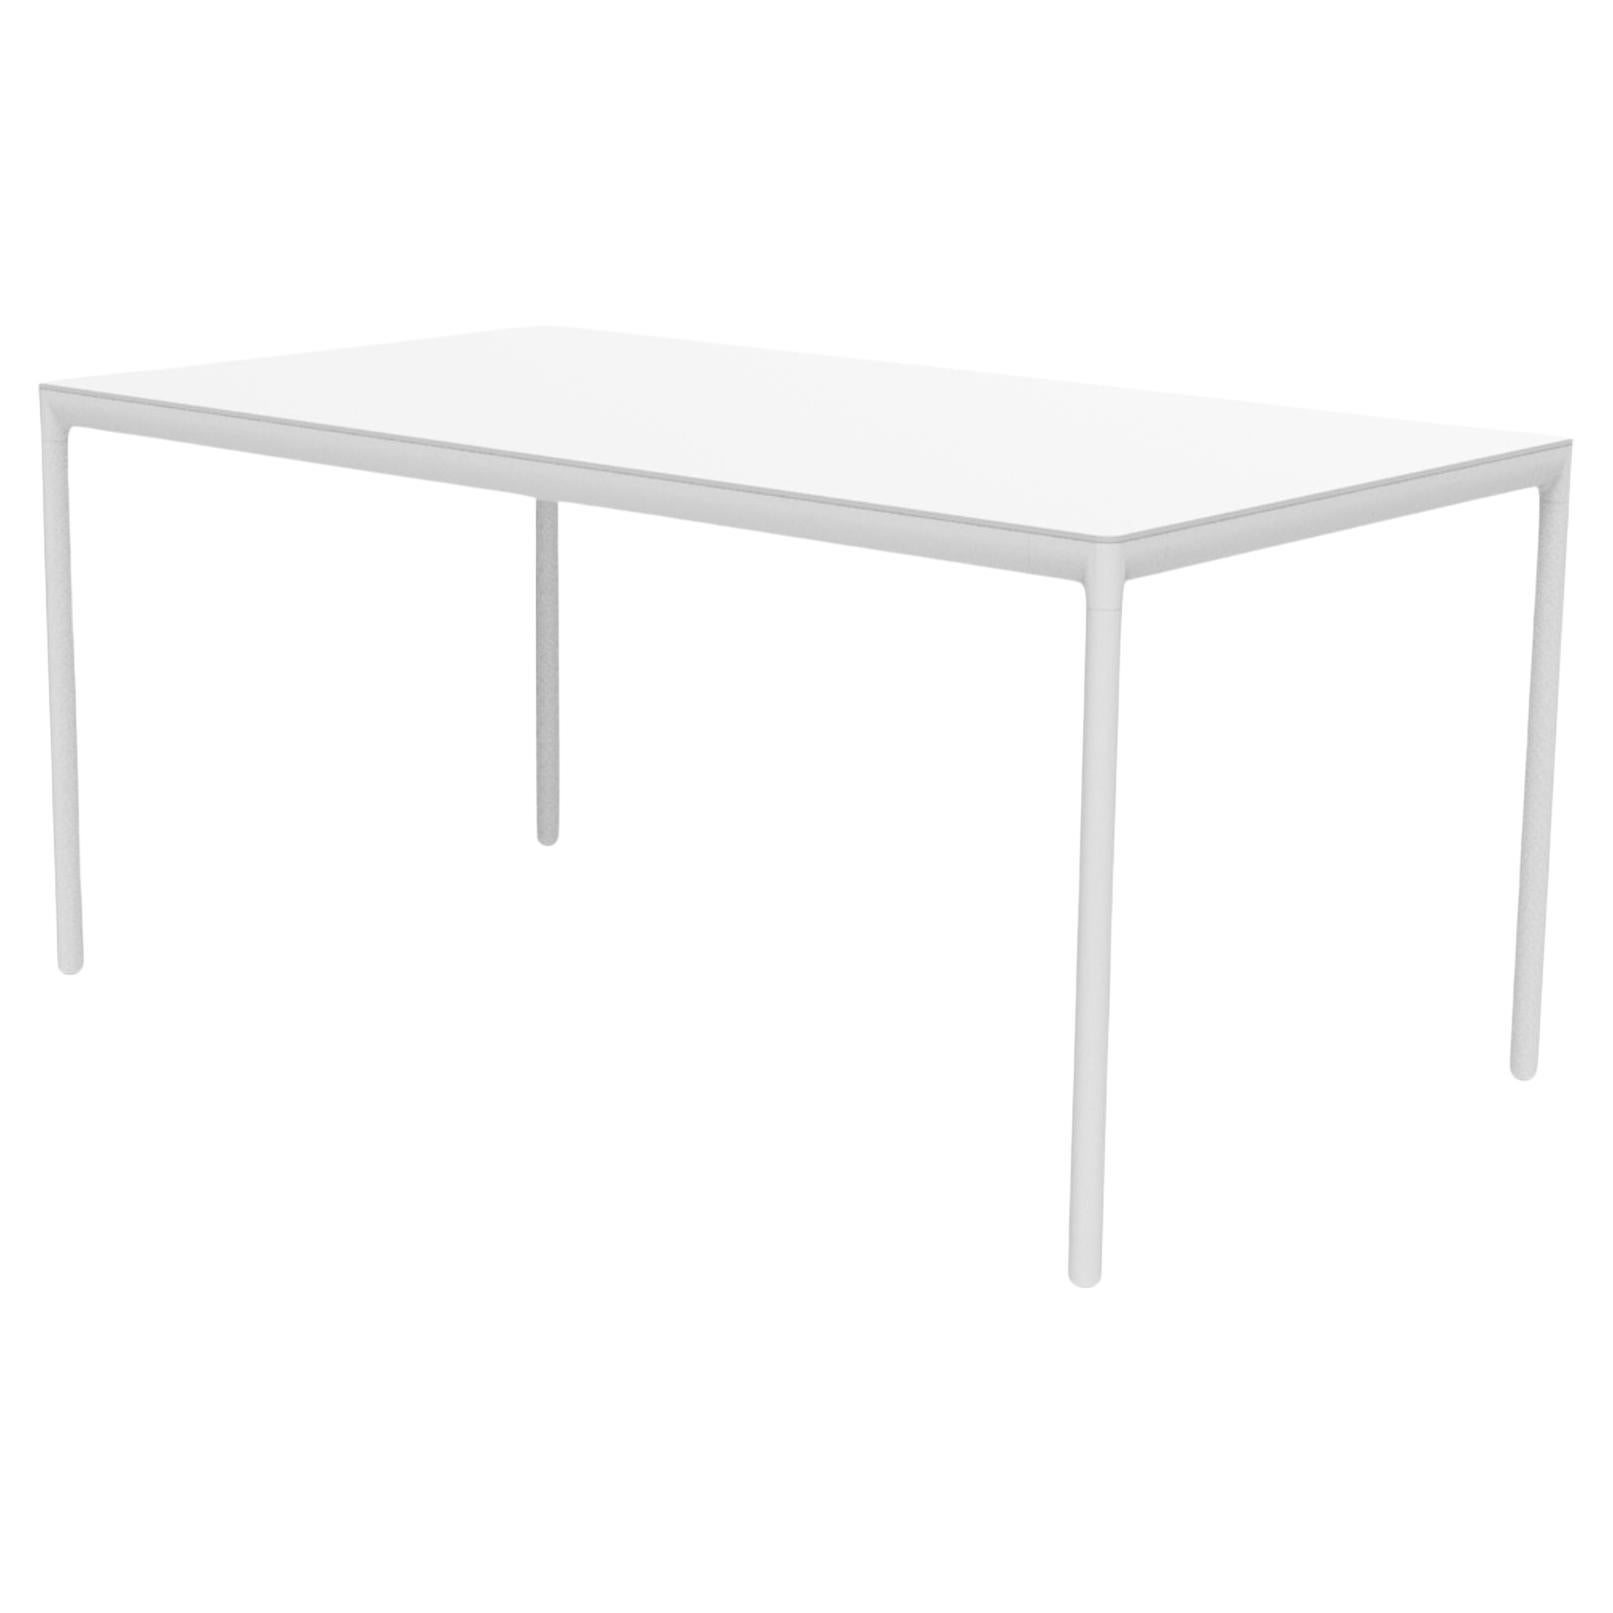 Ribbons White 160 Coffee Table by Mowee